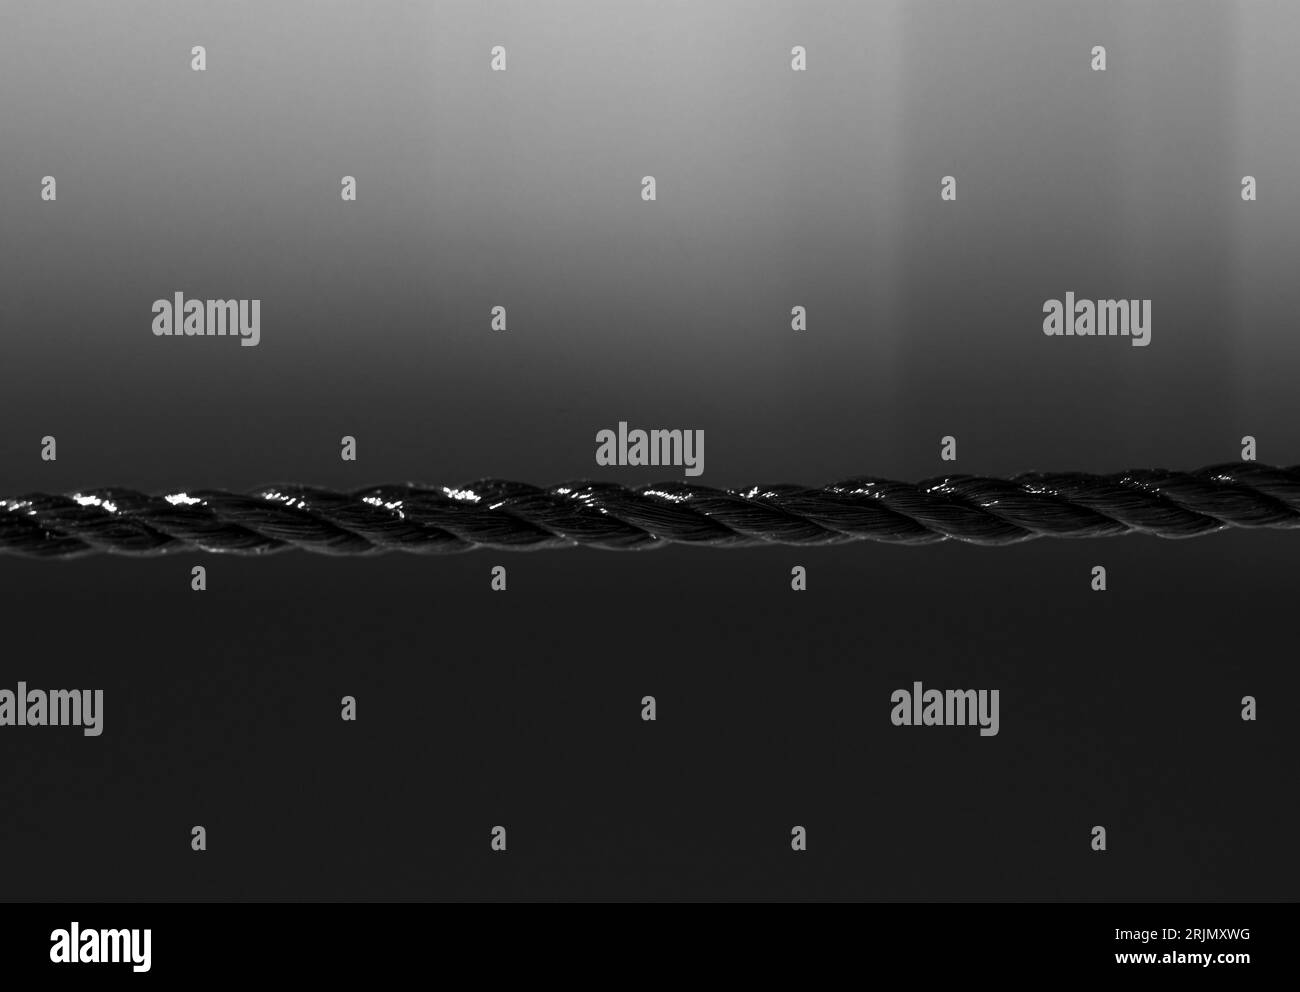 Black nylon rope in horizontal direction. Isolated on blurred black background. Close-up. Copy space. Stock Photo